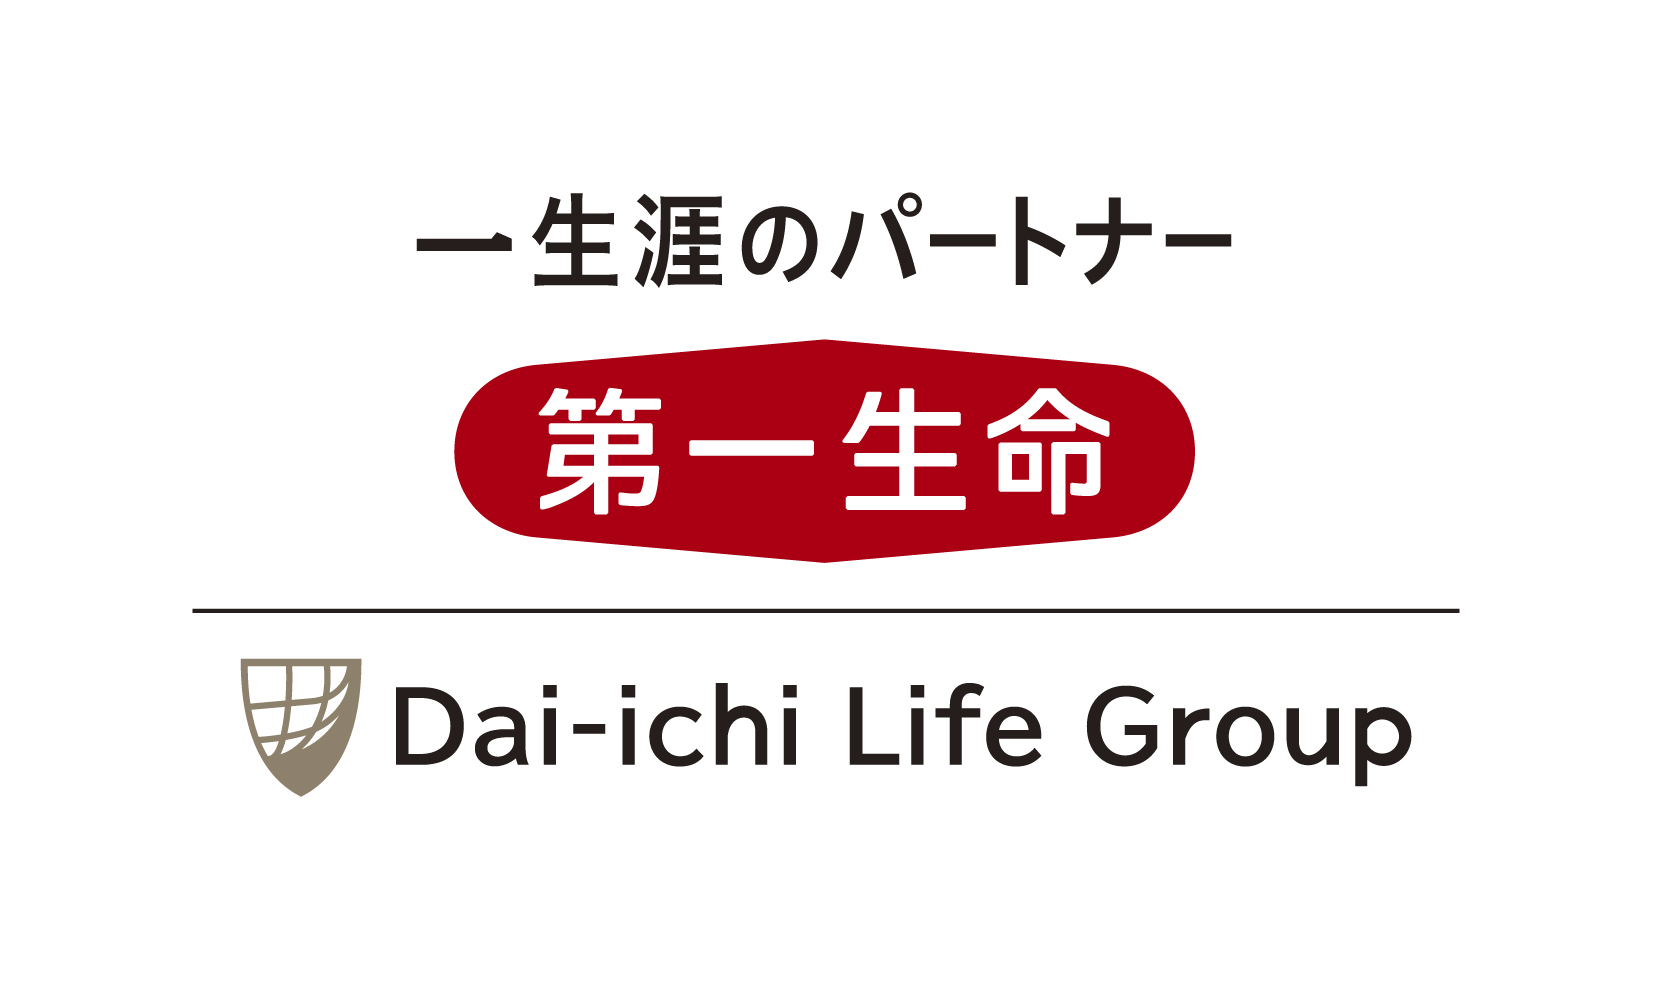 Impact Investments by The Dai-ichi Life Insurance Company, Limited through Private Equity (Investments in Privately Held Companies)